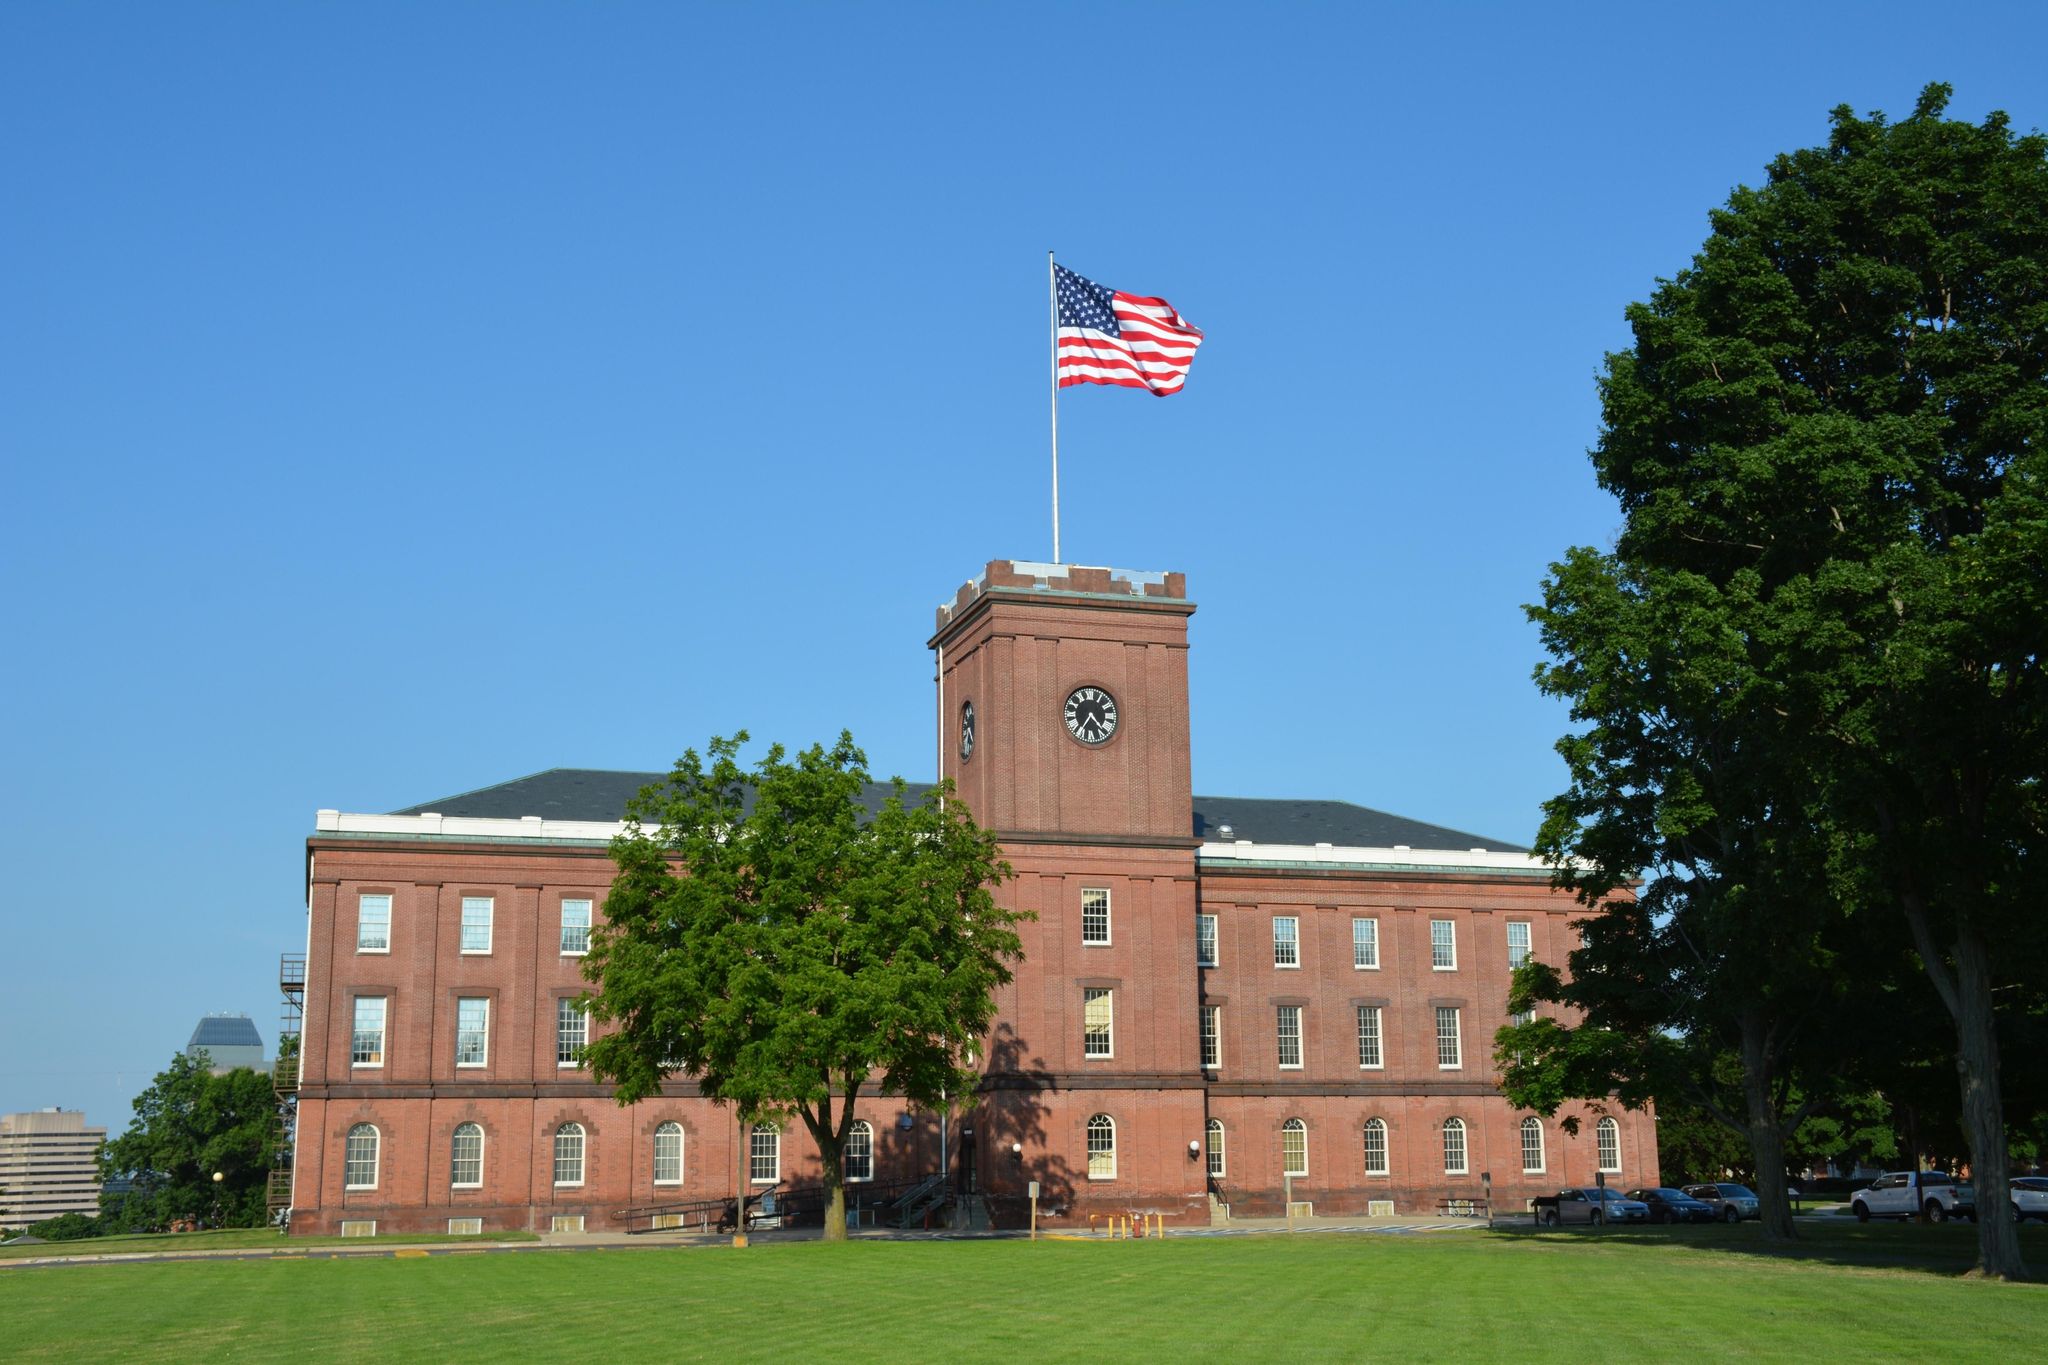 The Main Arsenal at Springfield Armory National Historic Site was first built in 1850 and today houses the park's amazing collection of historic firearms.